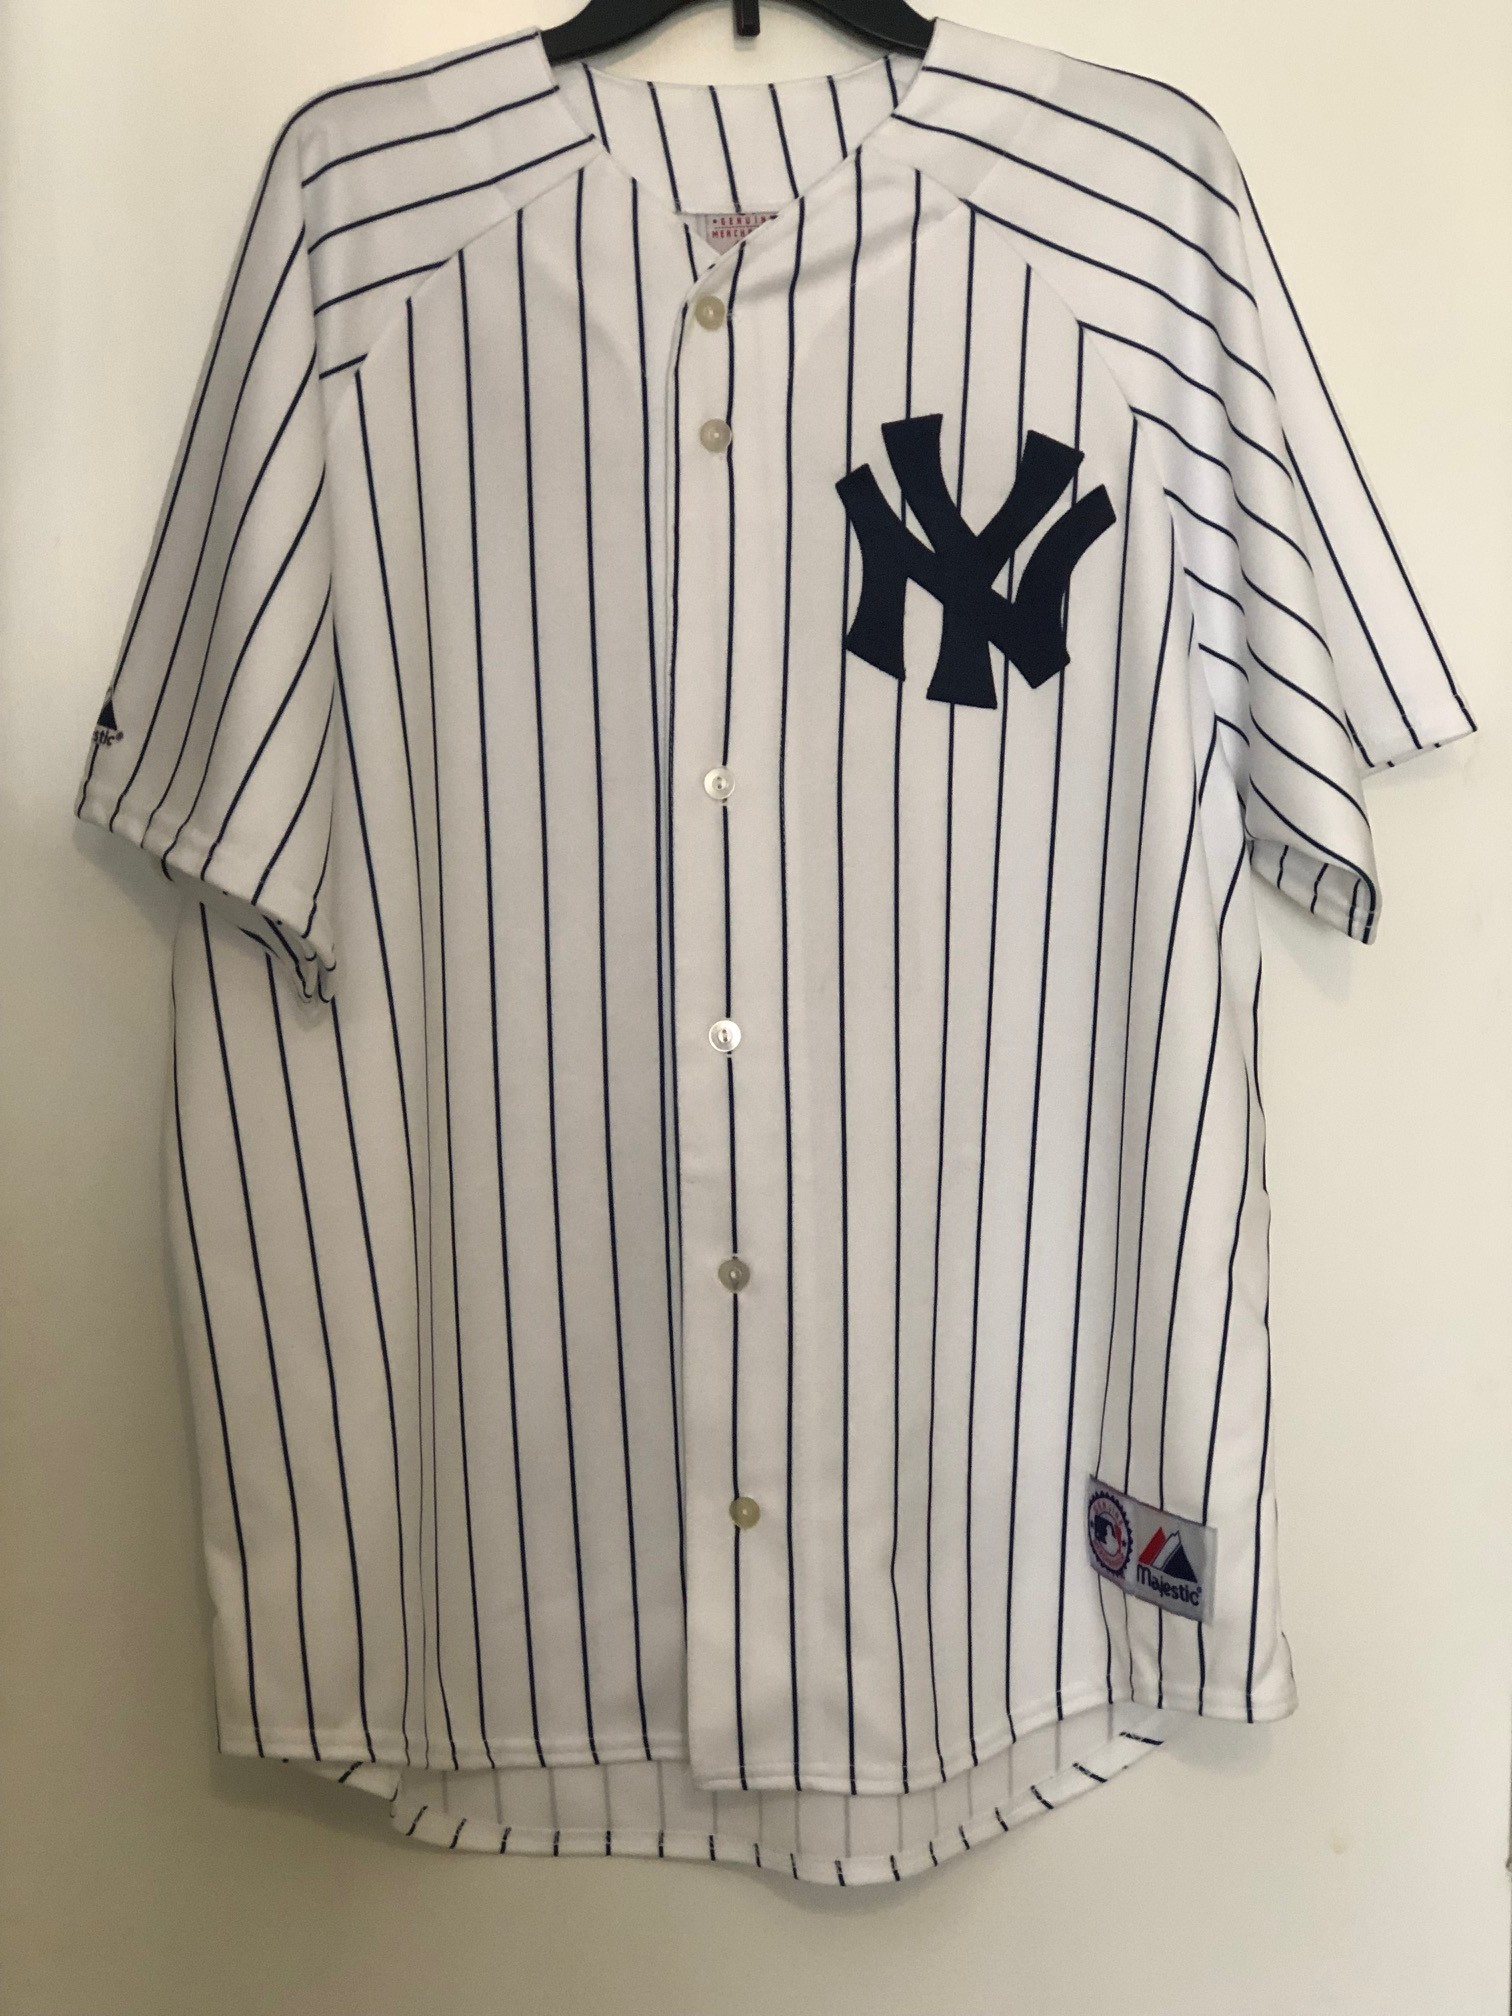 Derek Jeter's first-ever New York Yankees jersey up for auction